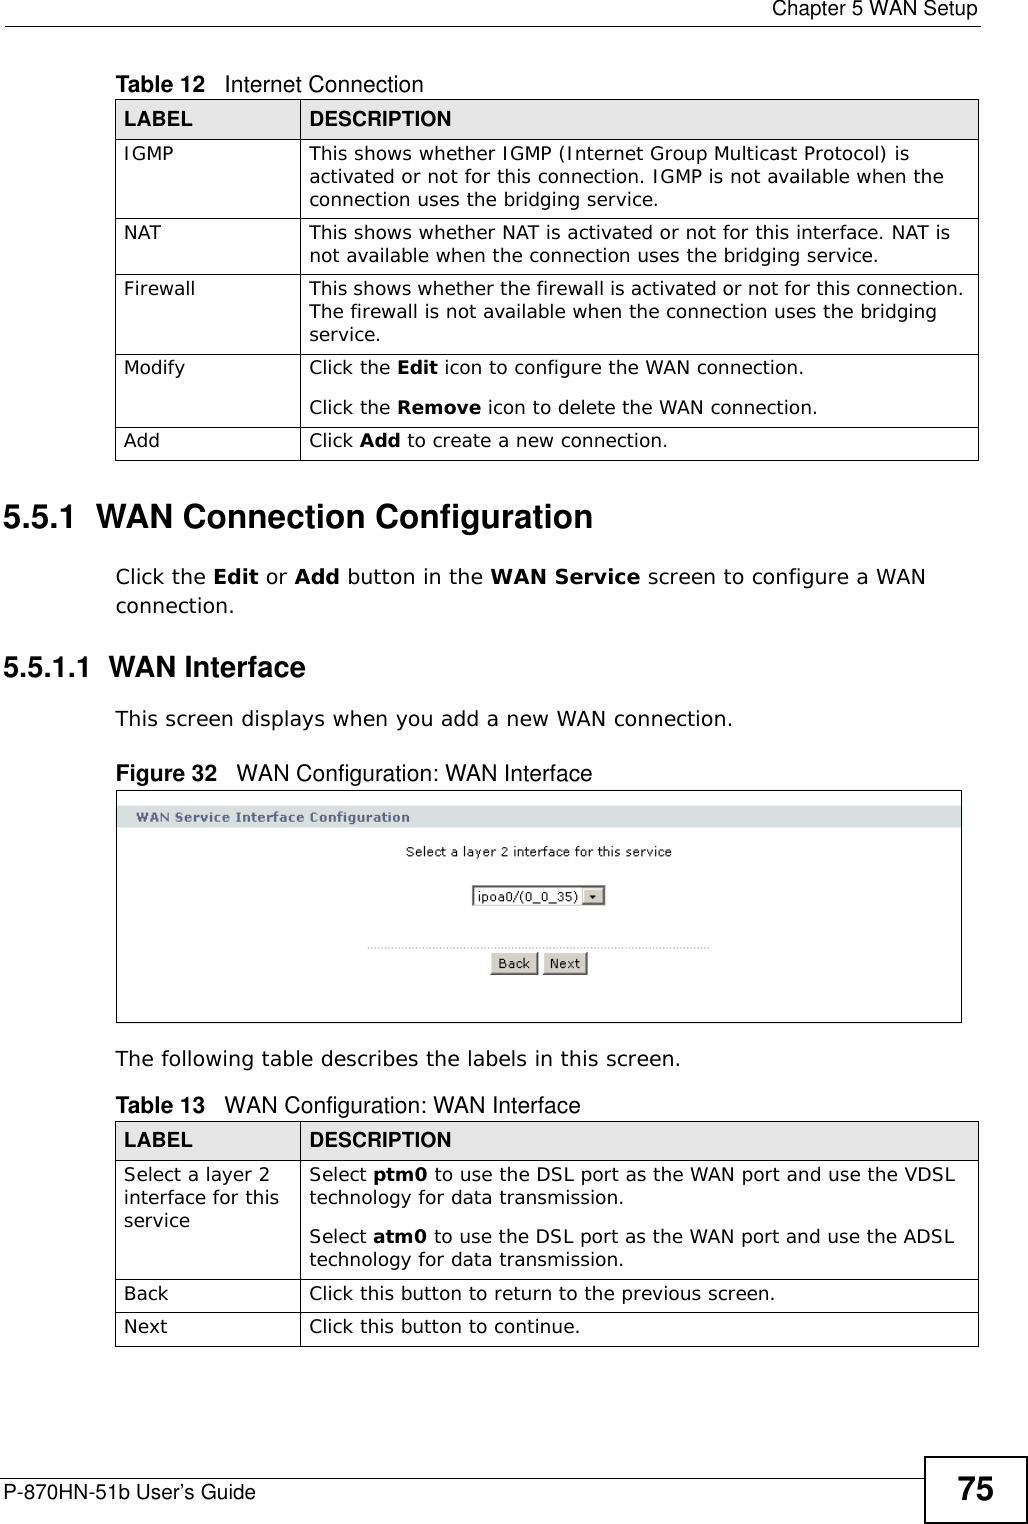  Chapter 5 WAN SetupP-870HN-51b User’s Guide 755.5.1  WAN Connection ConfigurationClick the Edit or Add button in the WAN Service screen to configure a WAN connection. 5.5.1.1  WAN InterfaceThis screen displays when you add a new WAN connection.Figure 32   WAN Configuration: WAN Interface The following table describes the labels in this screen. IGMP This shows whether IGMP (Internet Group Multicast Protocol) is activated or not for this connection. IGMP is not available when the connection uses the bridging service.NAT This shows whether NAT is activated or not for this interface. NAT is not available when the connection uses the bridging service.Firewall This shows whether the firewall is activated or not for this connection. The firewall is not available when the connection uses the bridging service.Modify Click the Edit icon to configure the WAN connection.Click the Remove icon to delete the WAN connection.Add Click Add to create a new connection.Table 12   Internet ConnectionLABEL DESCRIPTIONTable 13   WAN Configuration: WAN InterfaceLABEL DESCRIPTIONSelect a layer 2 interface for this serviceSelect ptm0 to use the DSL port as the WAN port and use the VDSL technology for data transmission.Select atm0 to use the DSL port as the WAN port and use the ADSL technology for data transmission.Back Click this button to return to the previous screen.Next Click this button to continue.